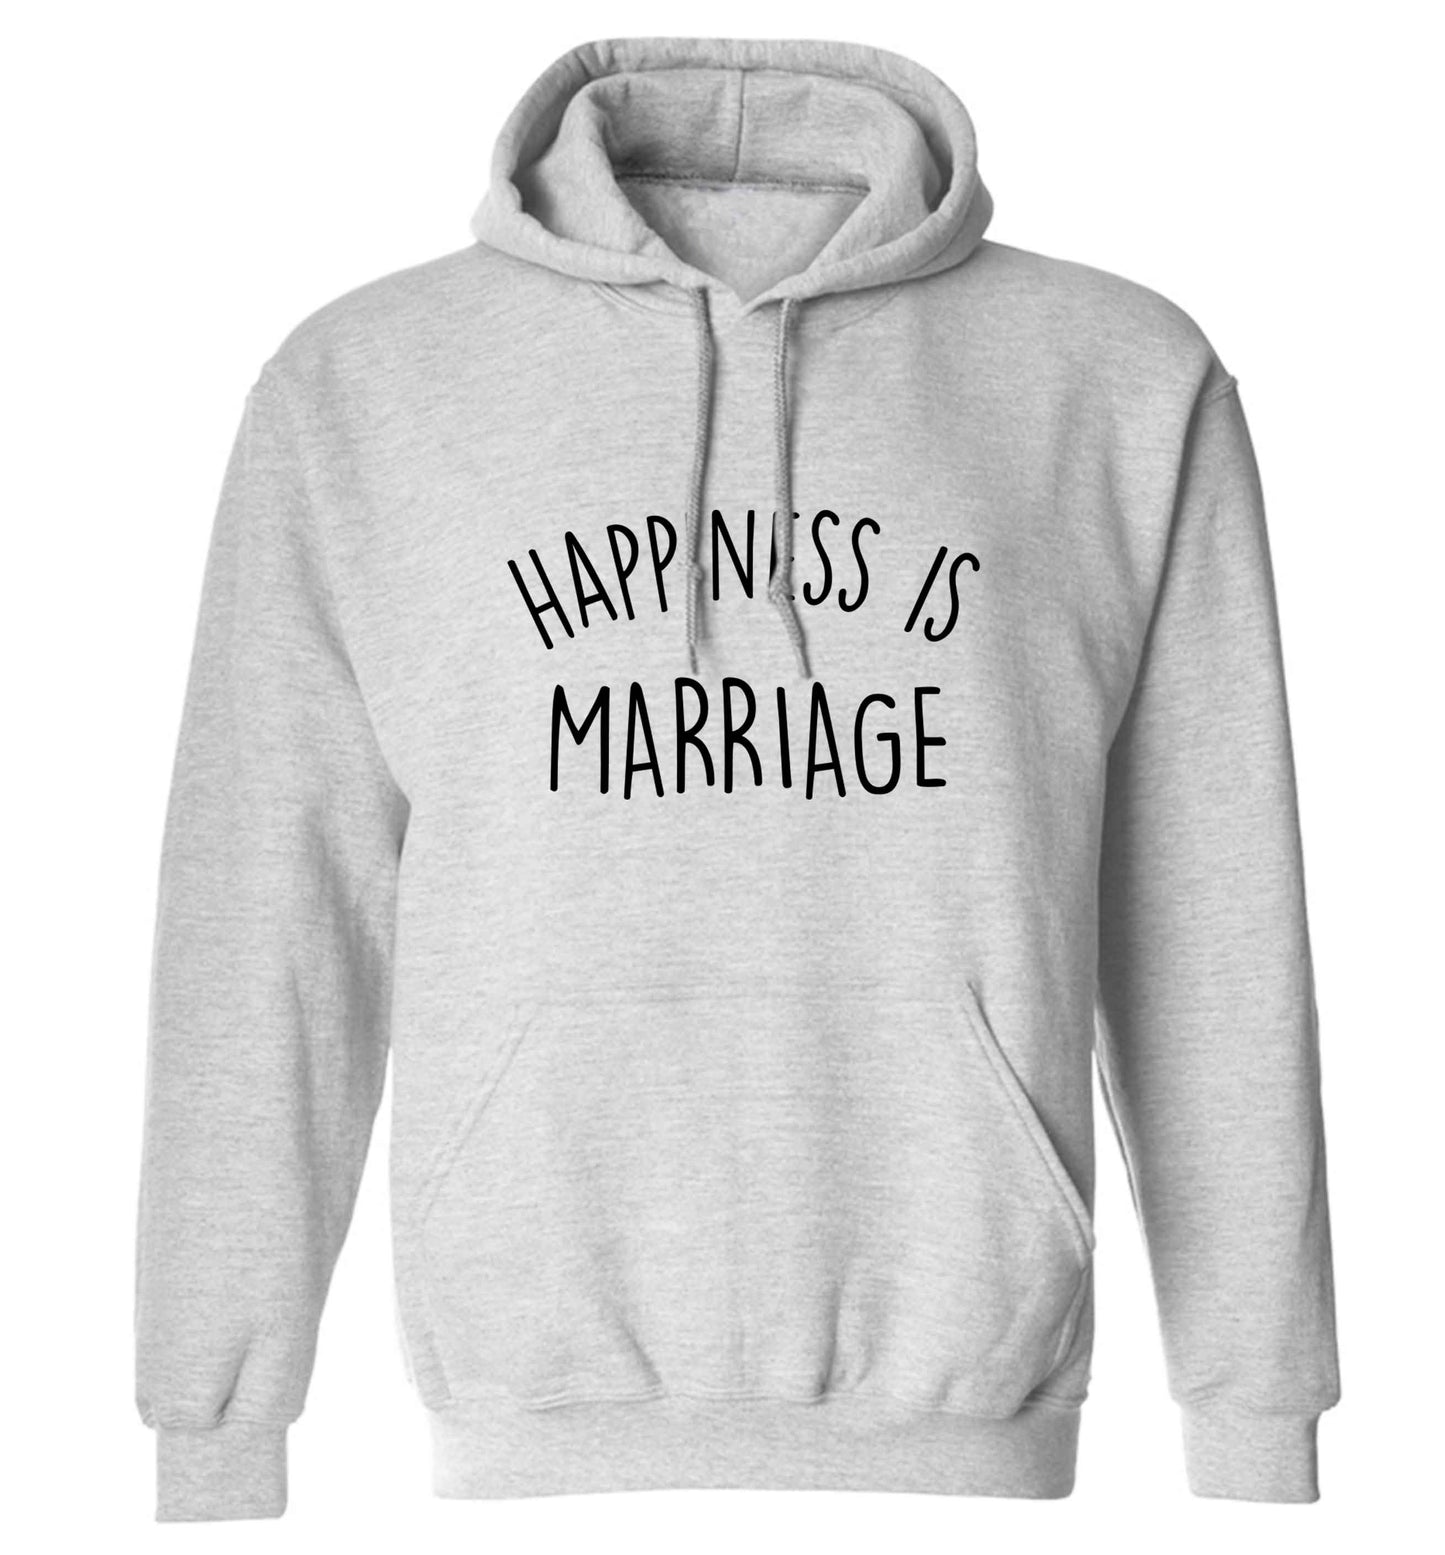 Happiness is marriage adults unisex grey hoodie 2XL